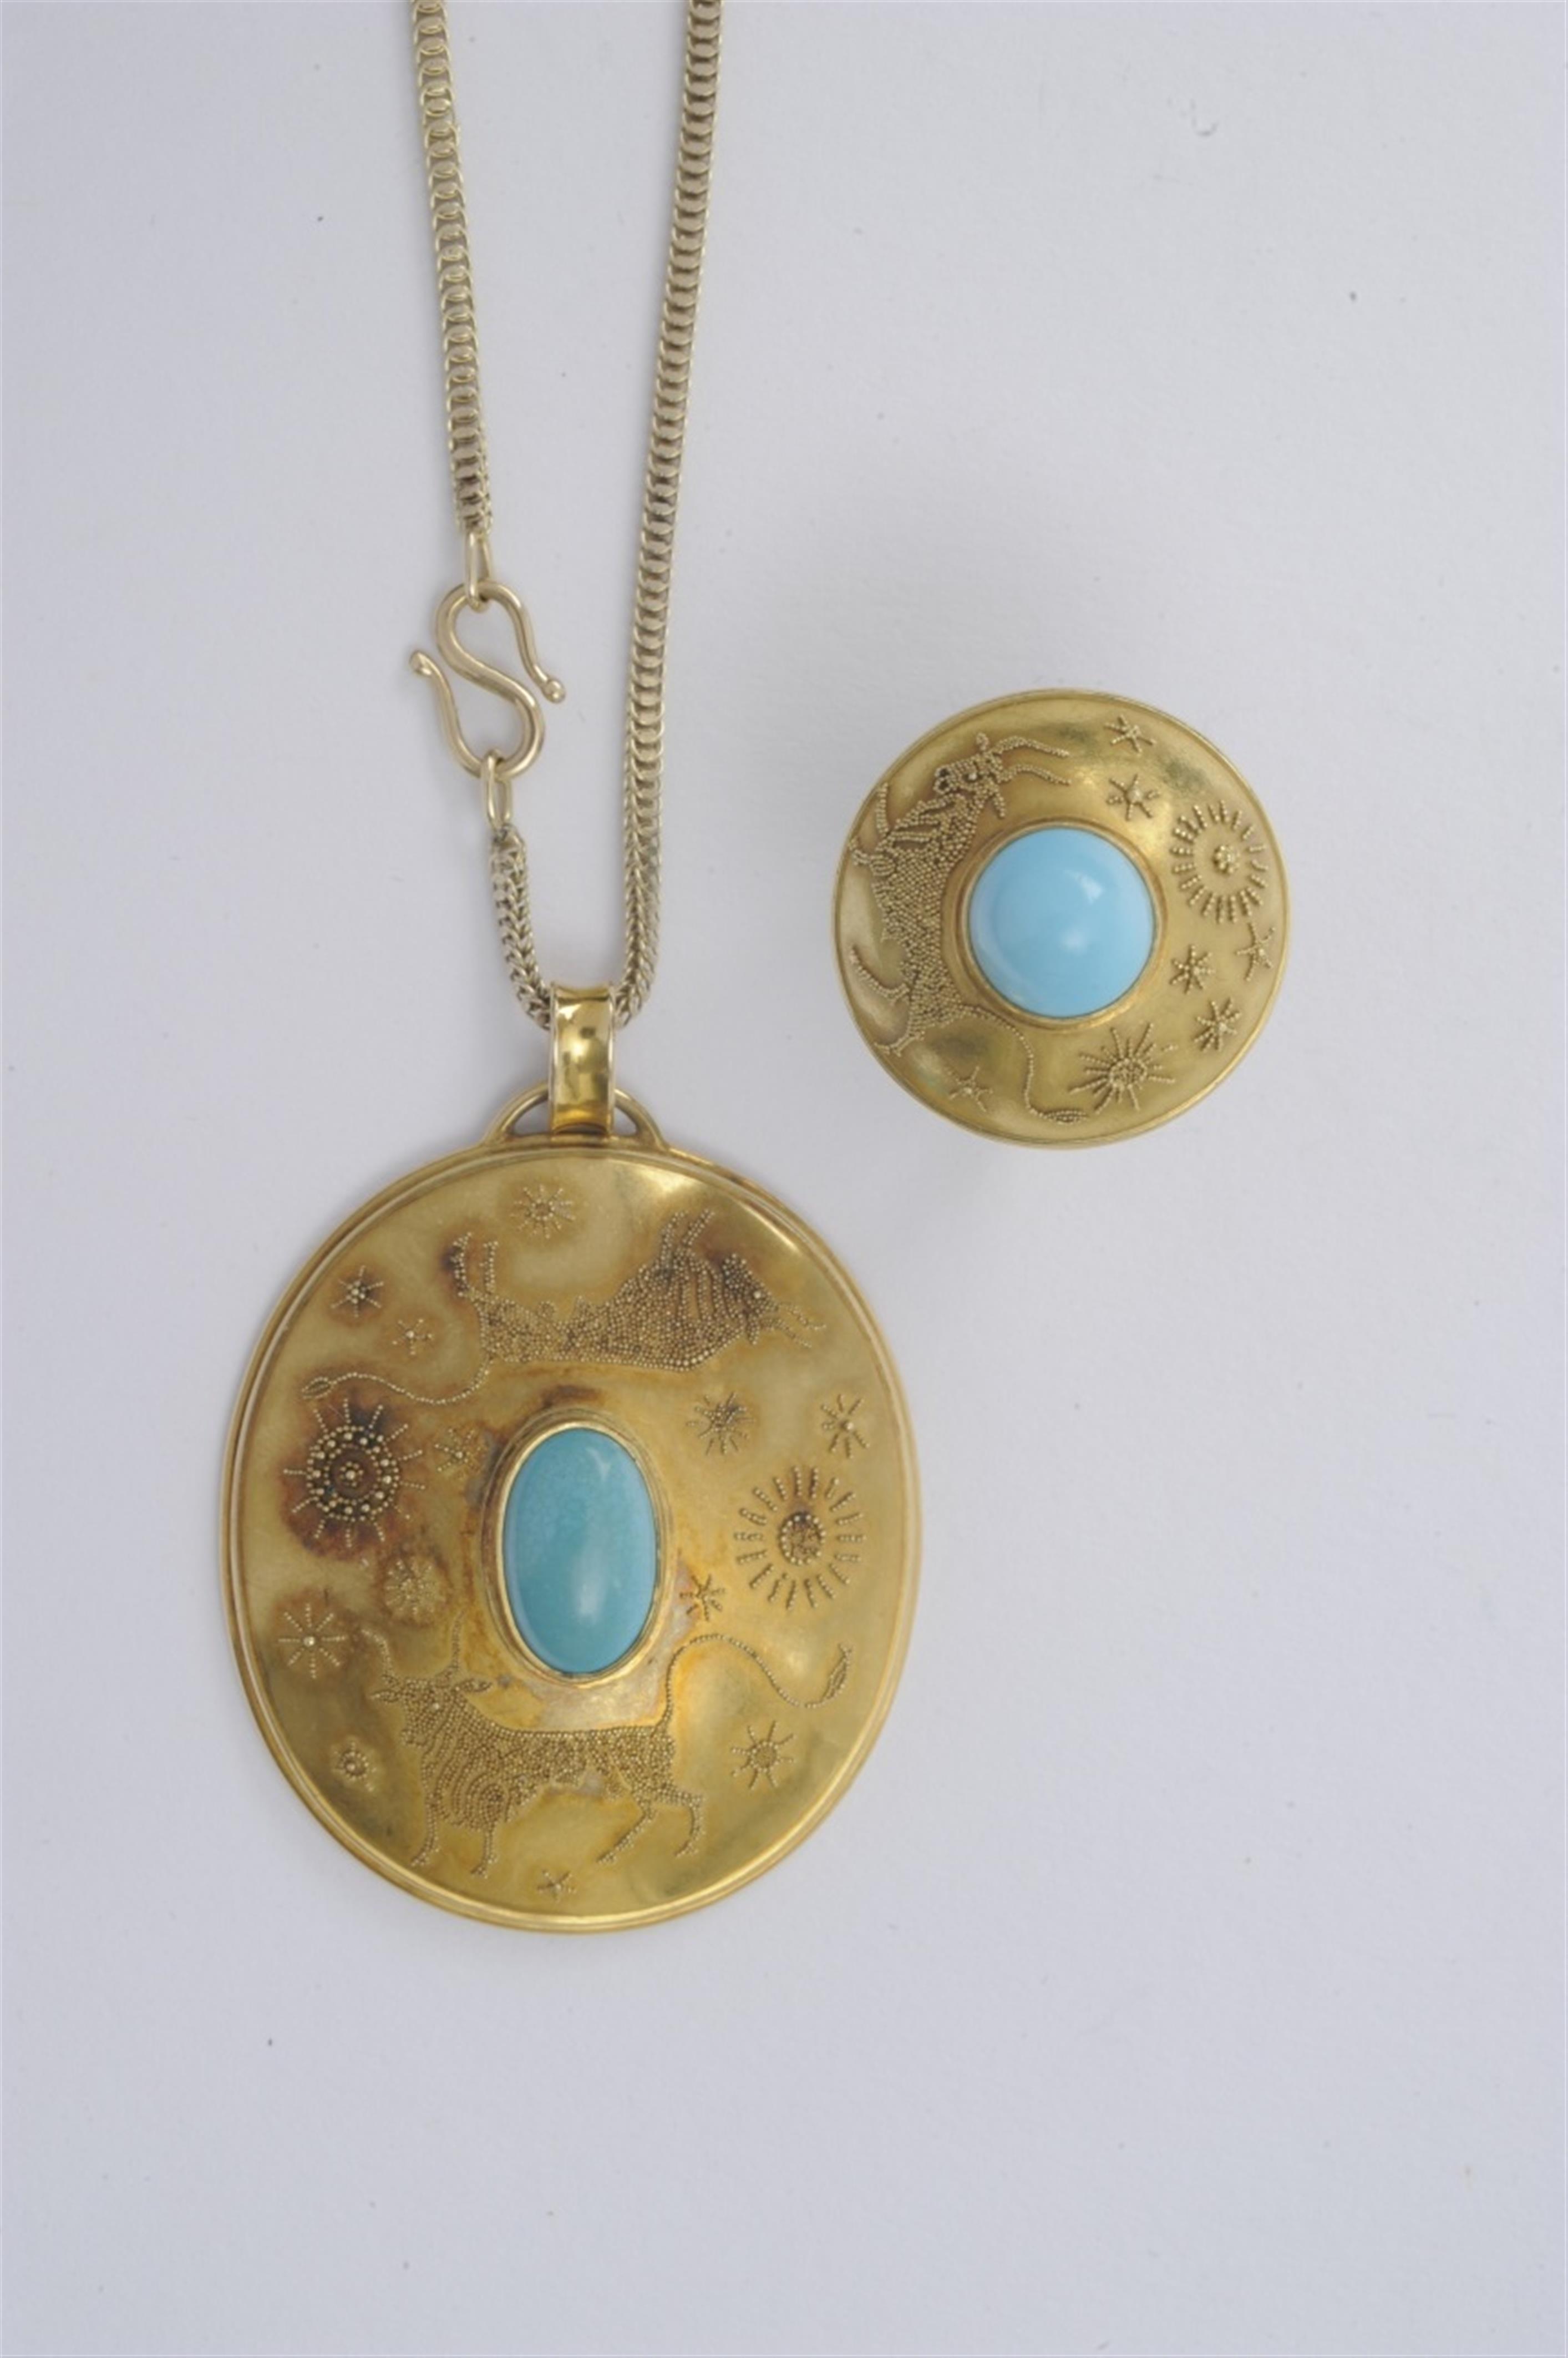 A 14k gold ring and pendant with granulated decor - image-1